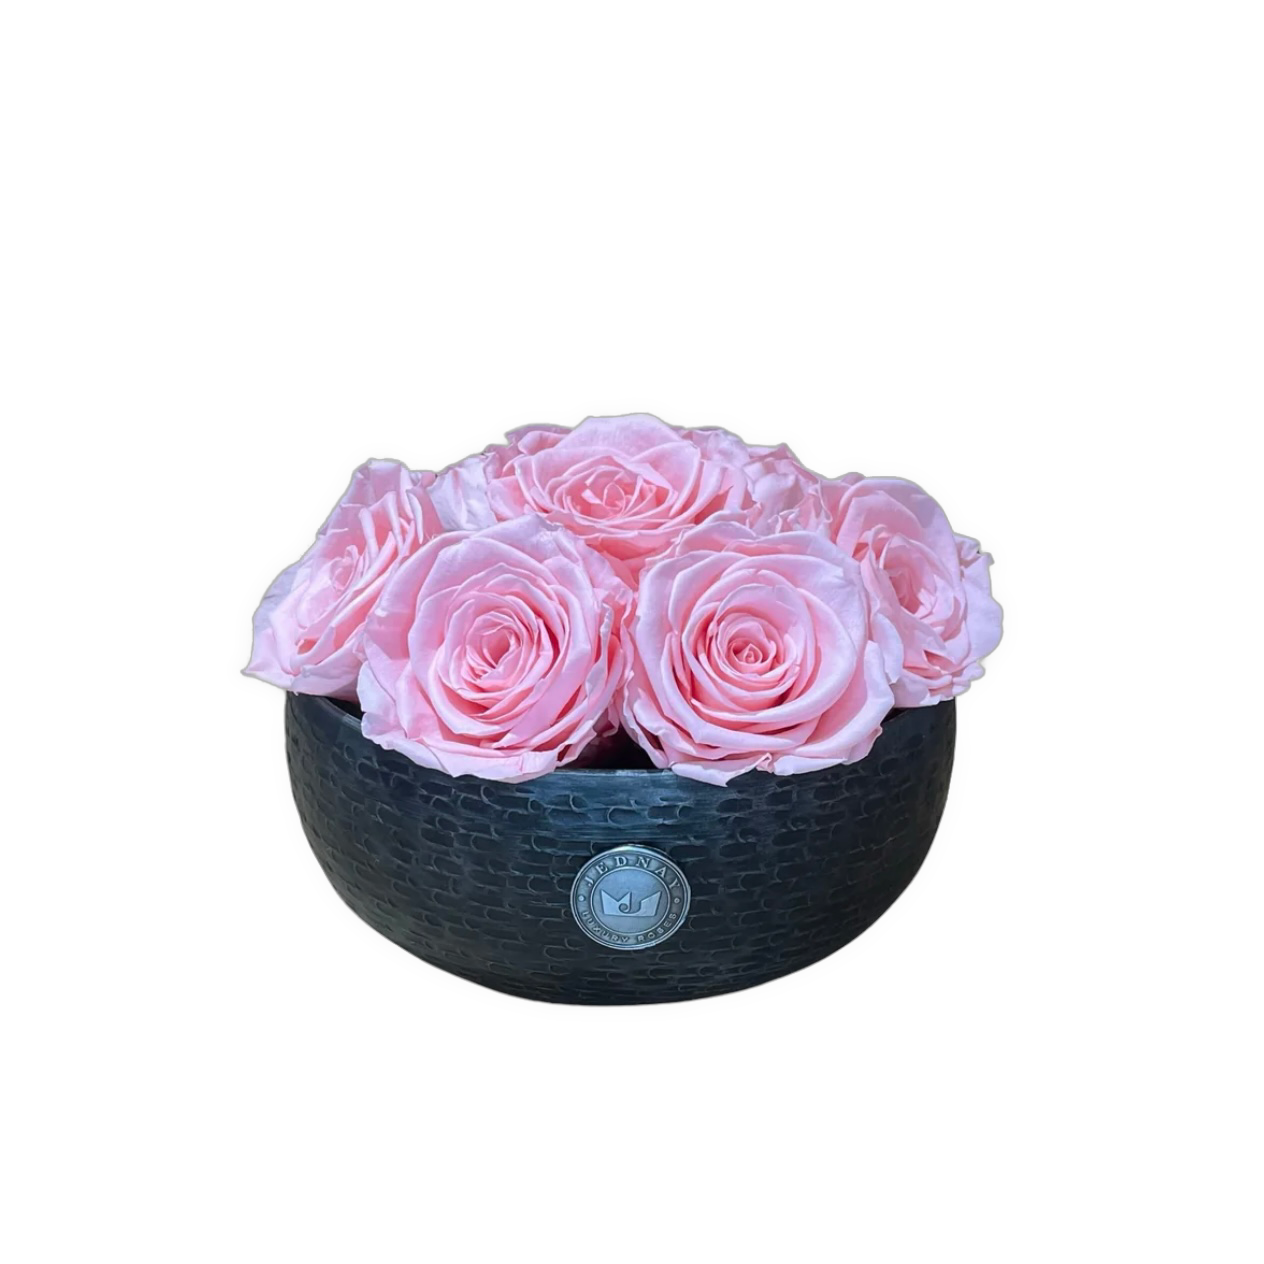 The Knightsbridge - Soft Pink Forever Roses - Pewter Bowl